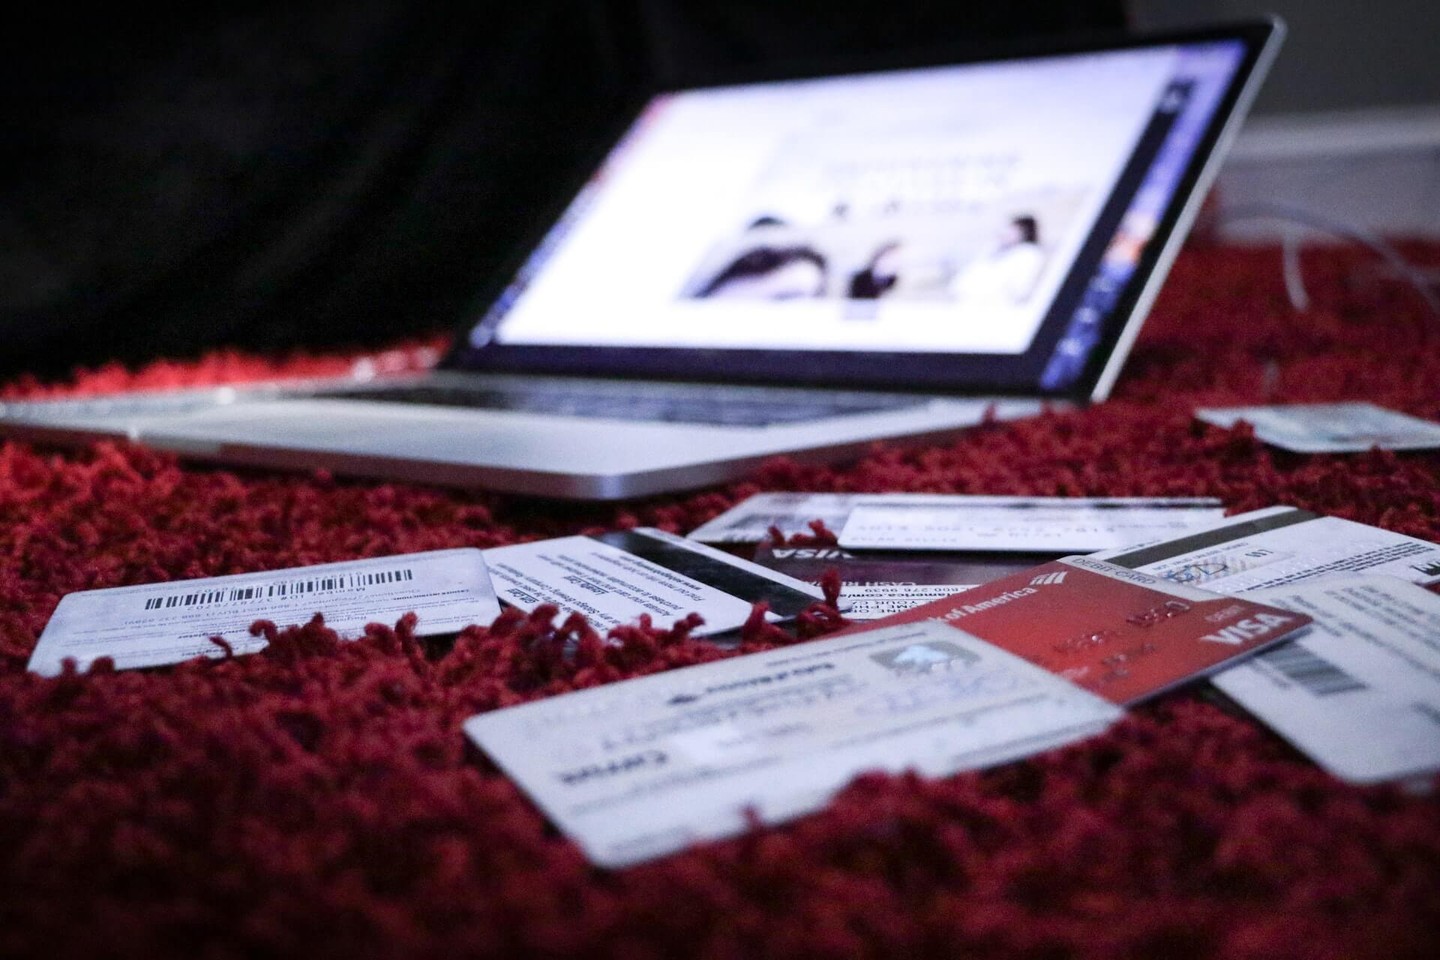 Laptop and credit cards on a red surface